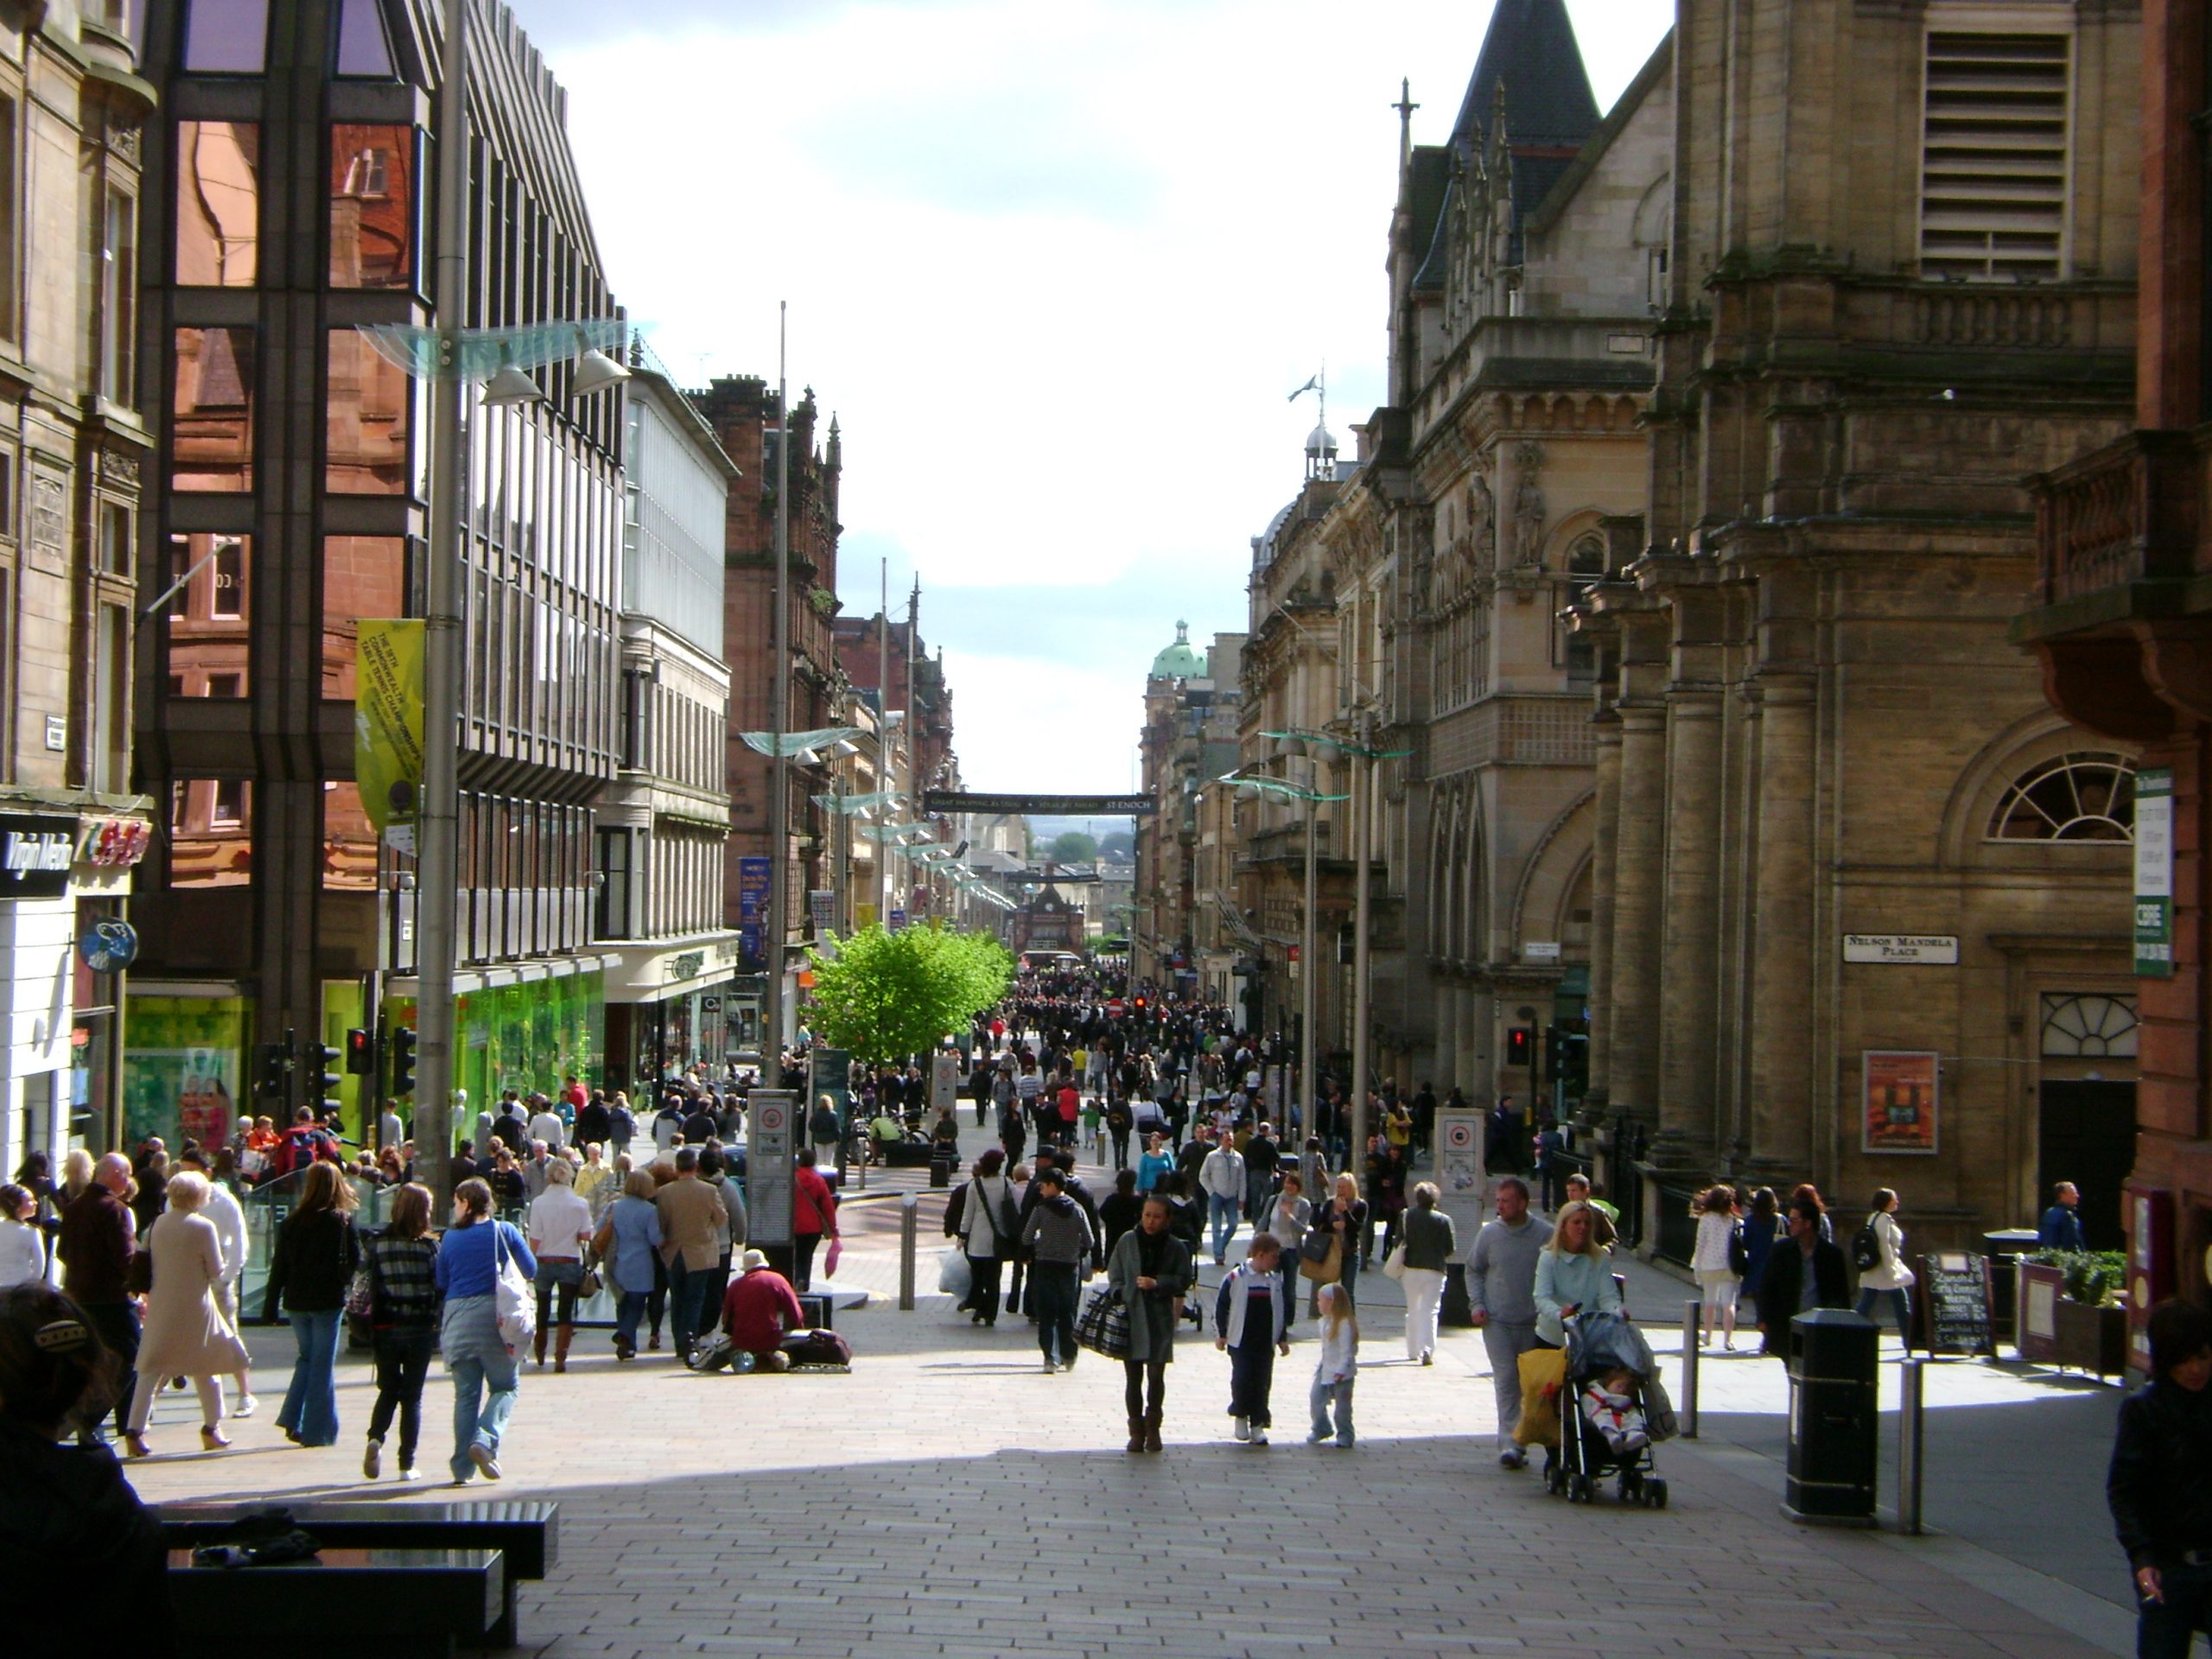 Consumption in action on one of Scotland's main shopping streets